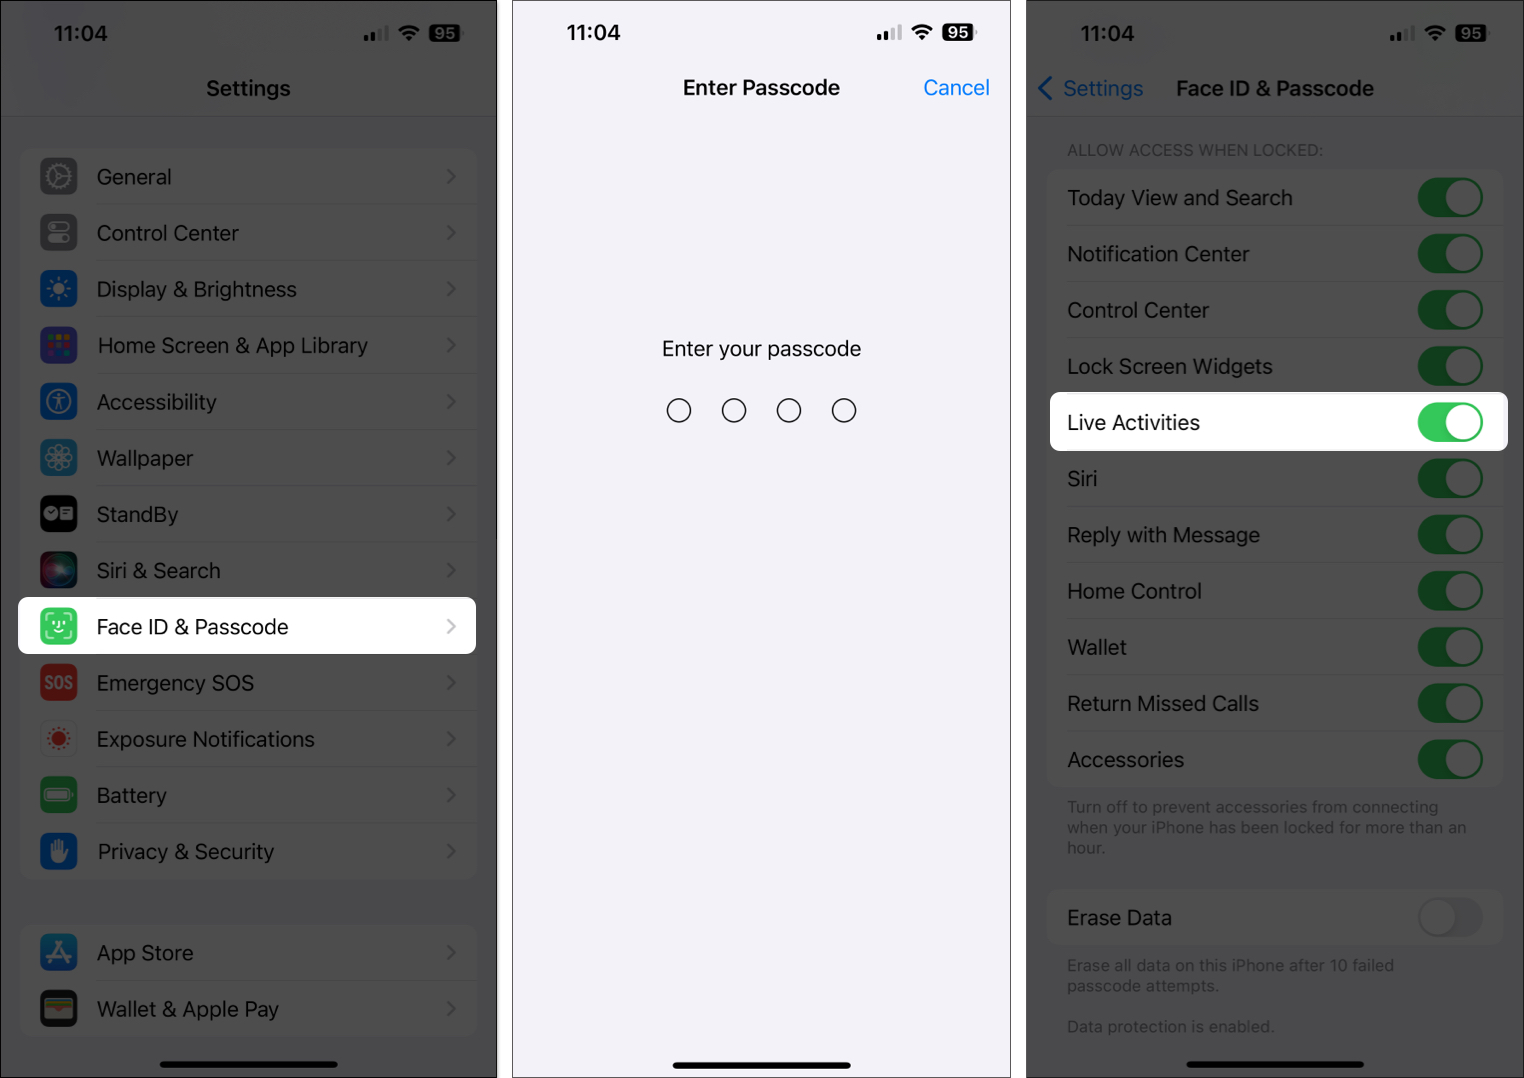 Tap Face ID and Passcode, enter passcode, toggle on Live Activities